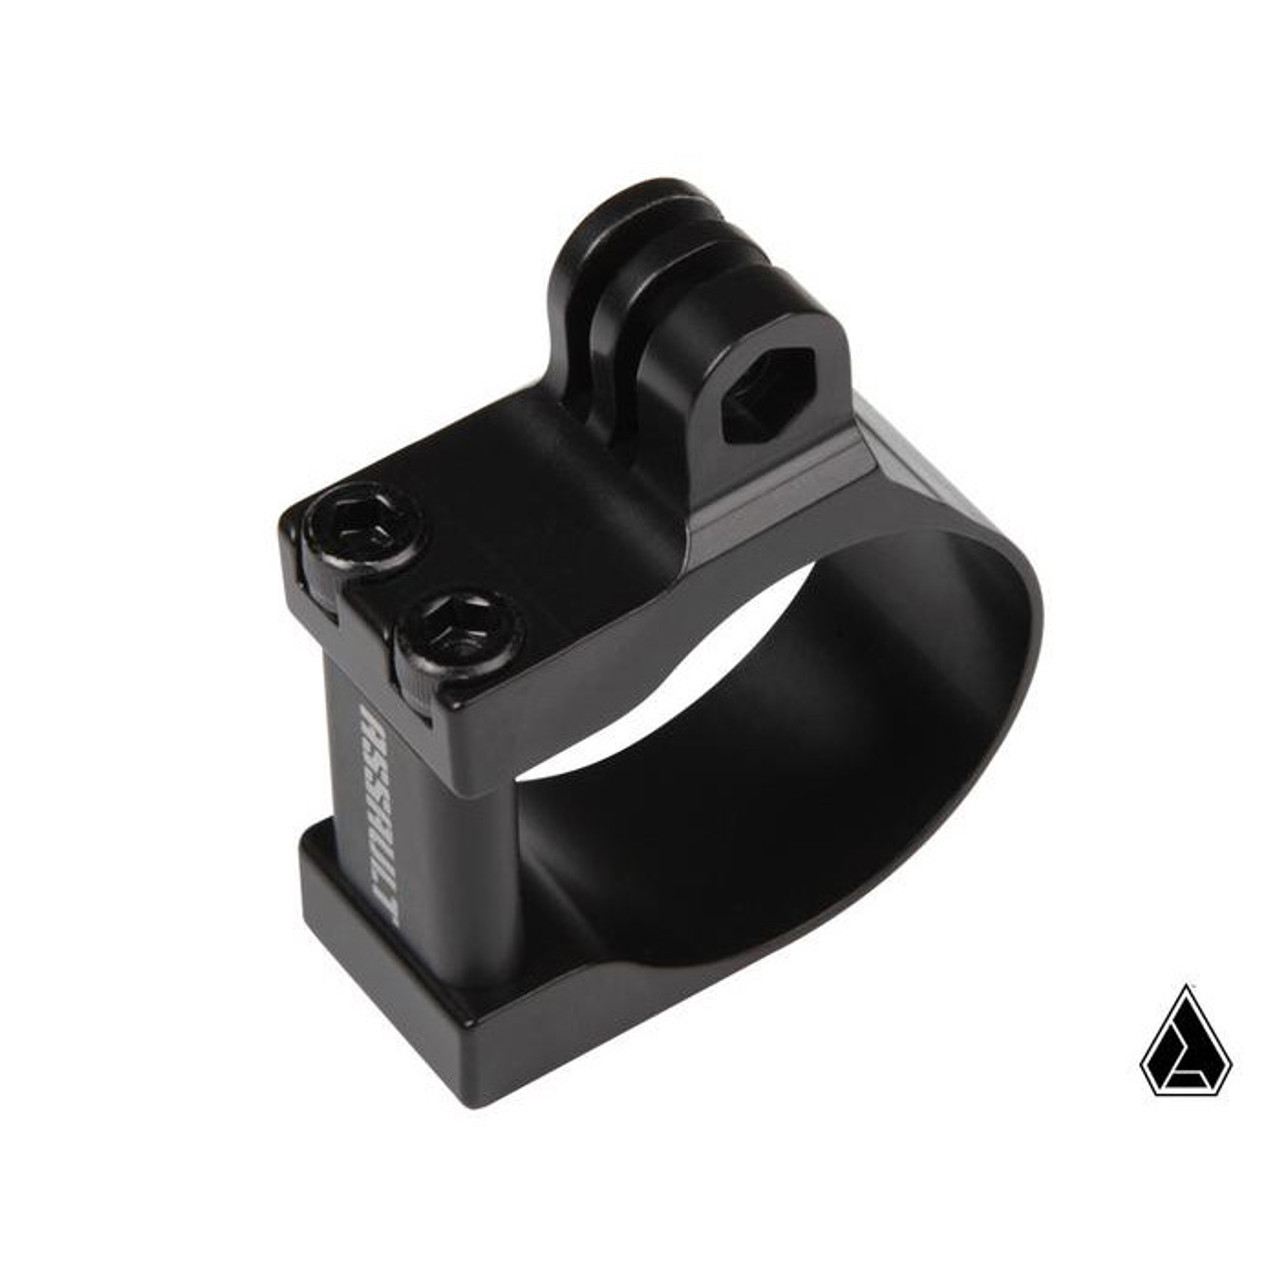 Assault Industries Rugged Action Camera Mount Clamp additional image 3